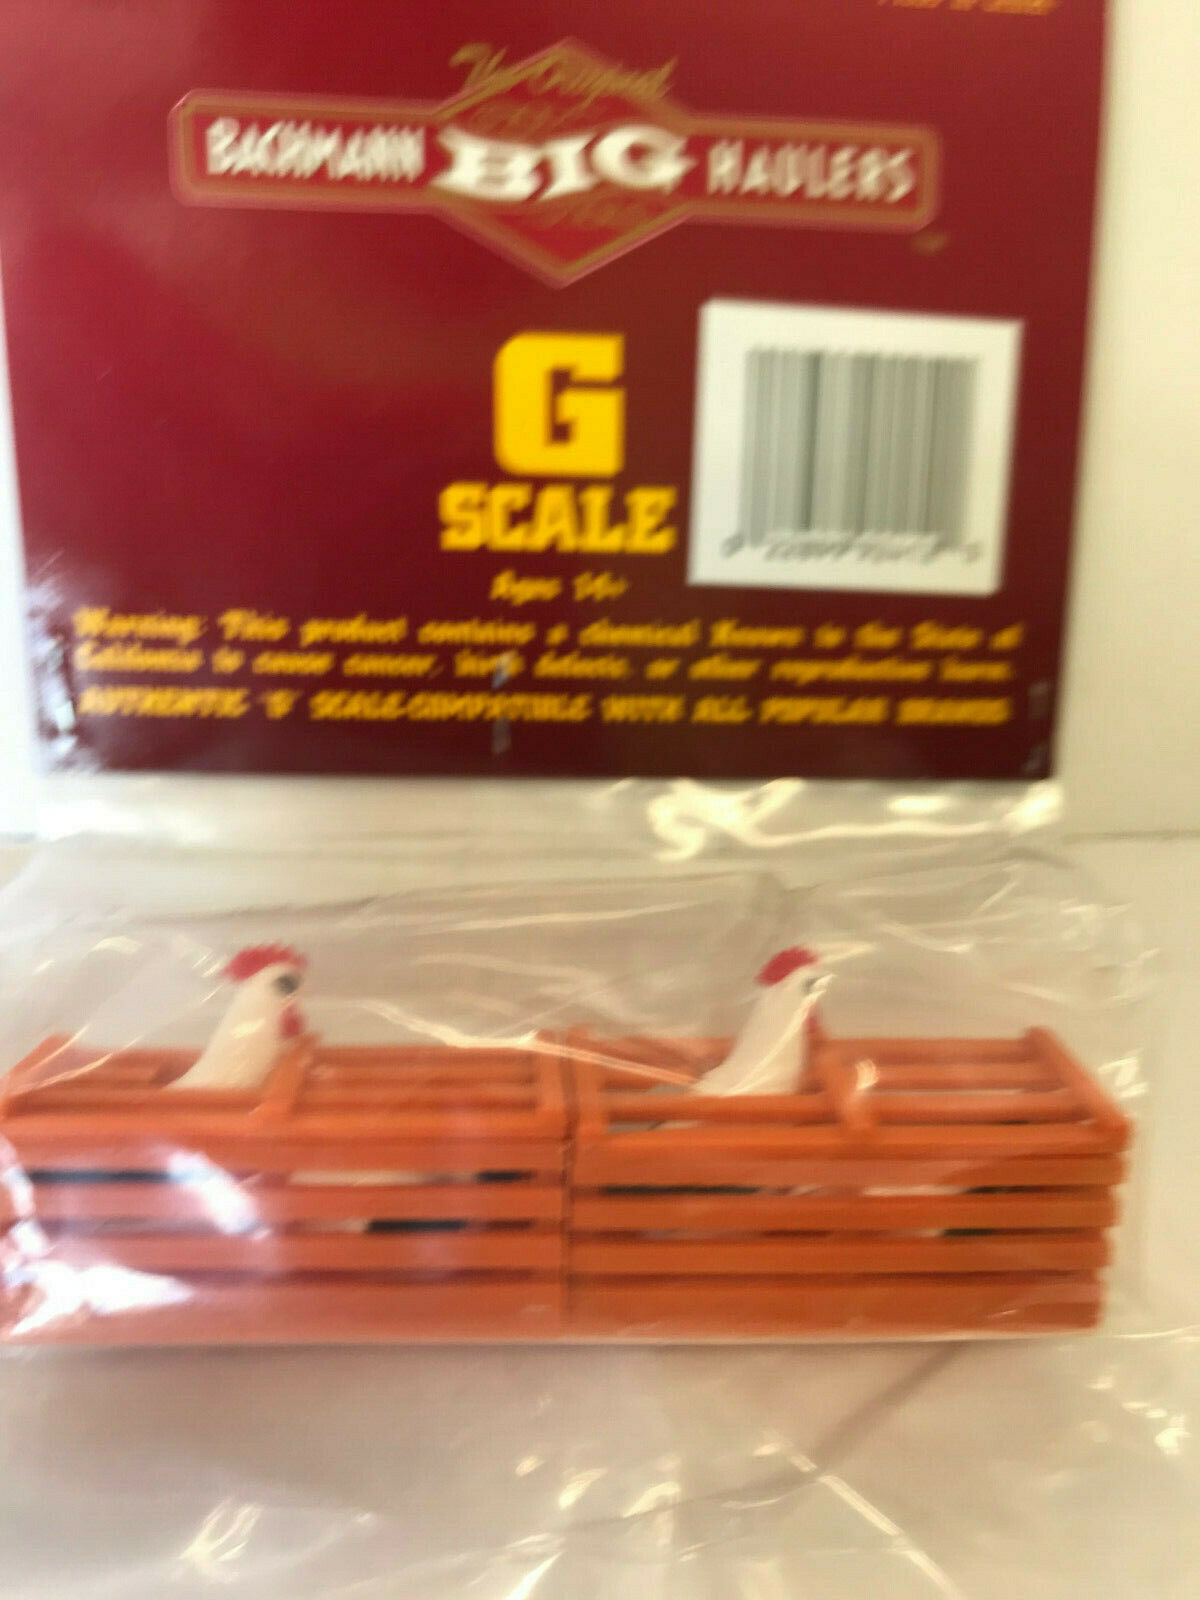 Bachmann 92412 Set Of 2 G Scale Crates With Chickens Discontinued & Sold Out New